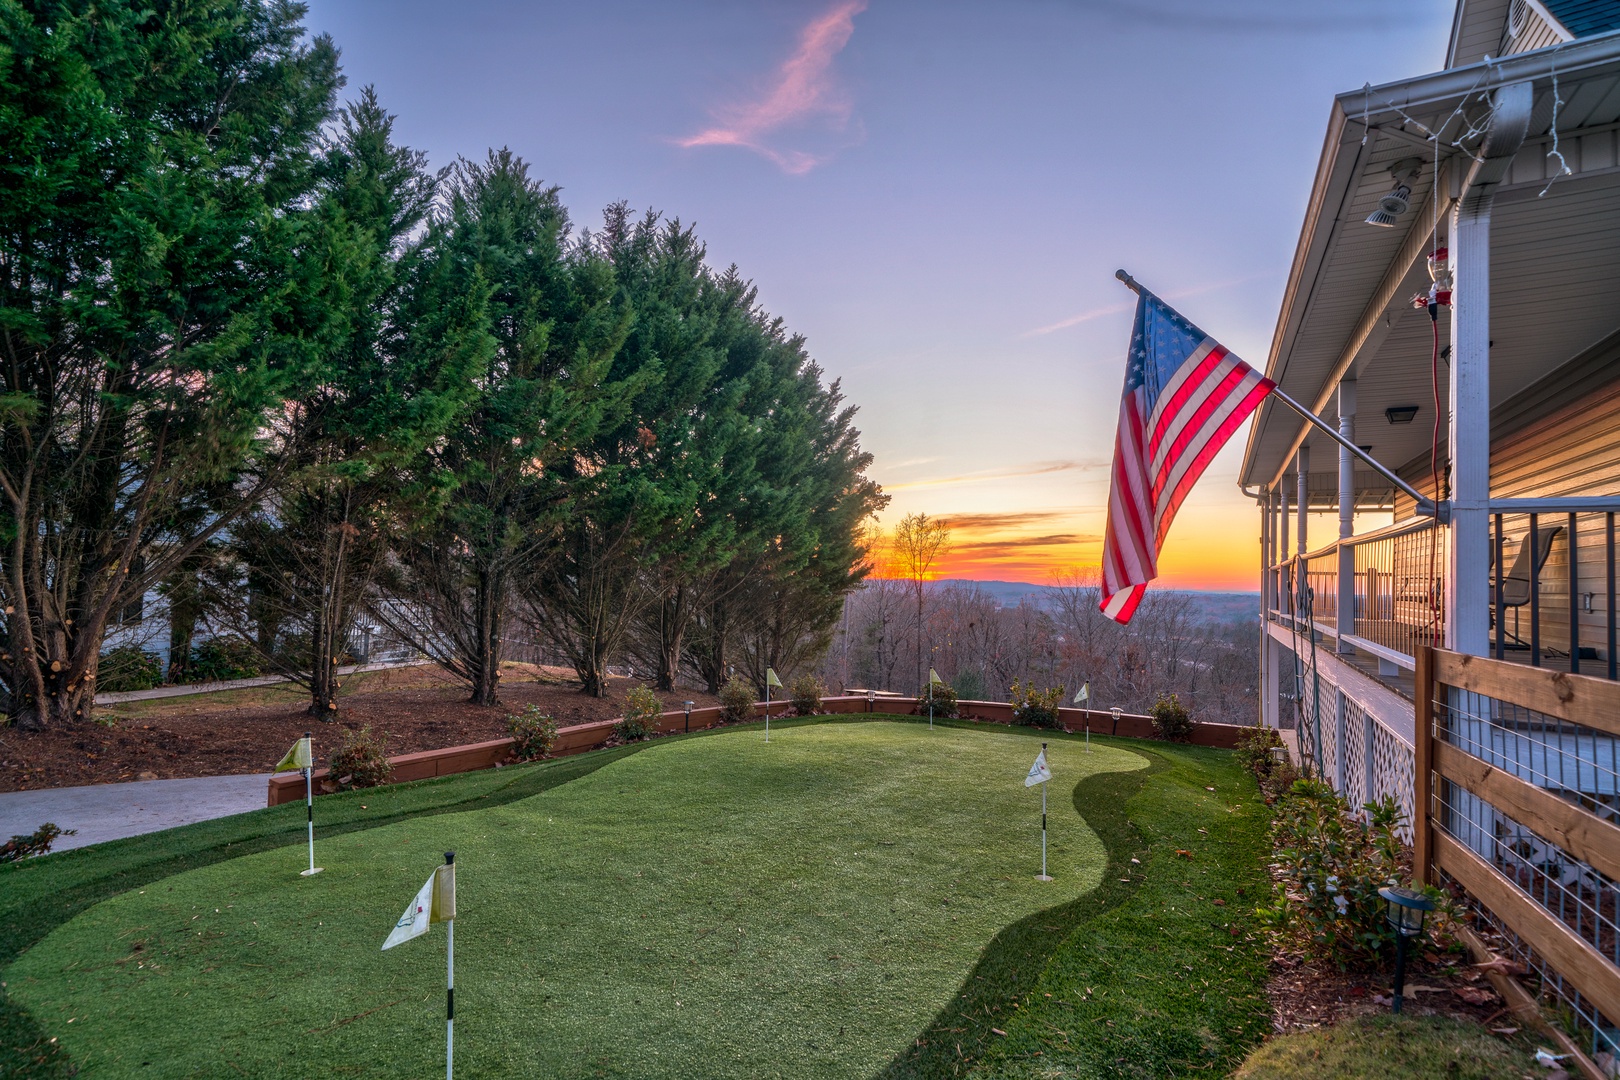 Not only do you get sunset , wrap around porch and a game room....a unique addition is the putting green